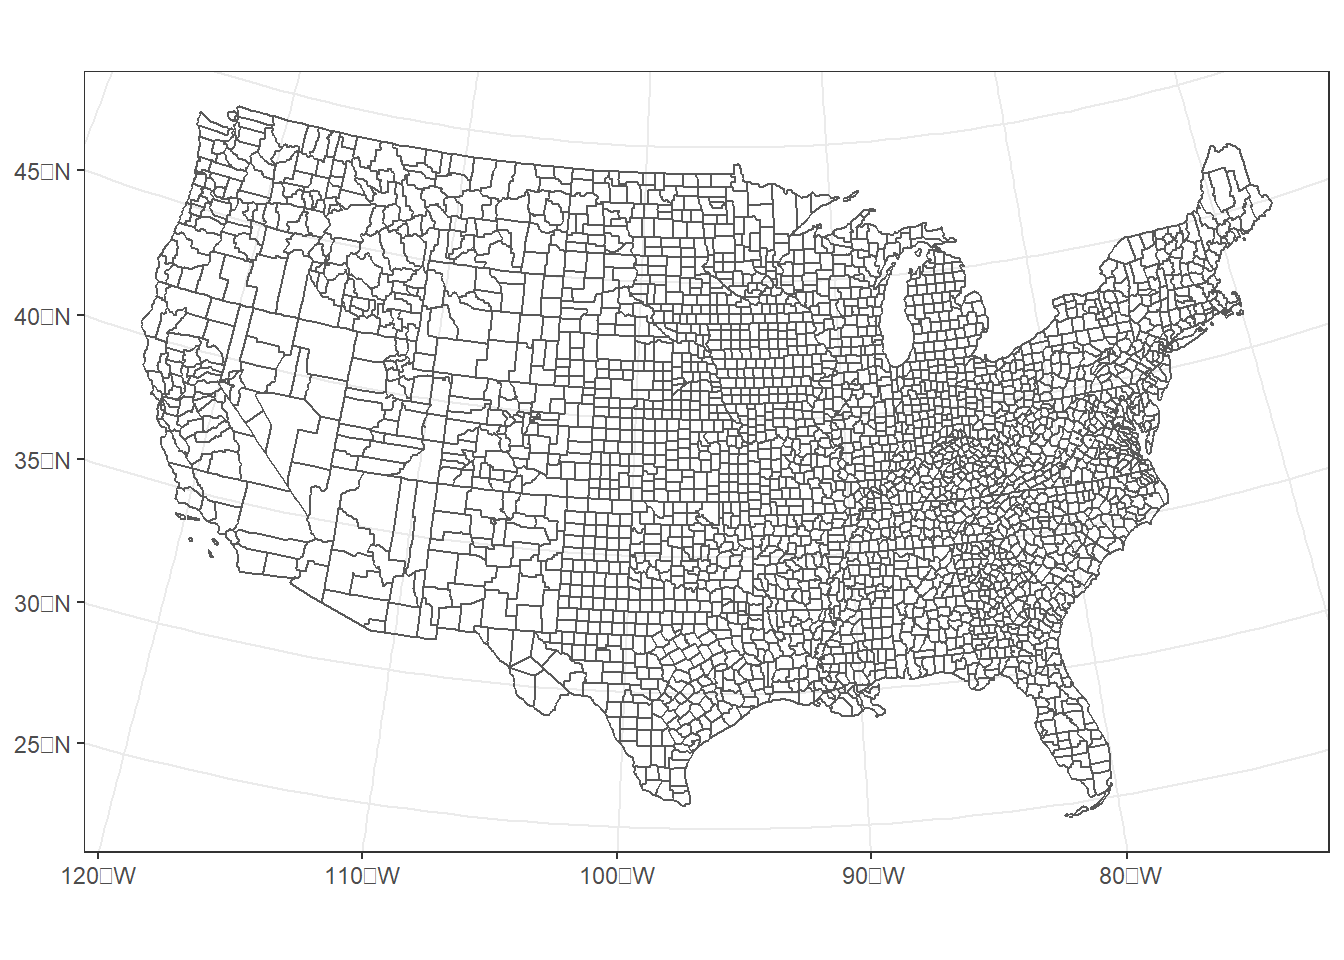 U.S. counties projected into an Albers Equal Area coordinate system for the conterminous United States.